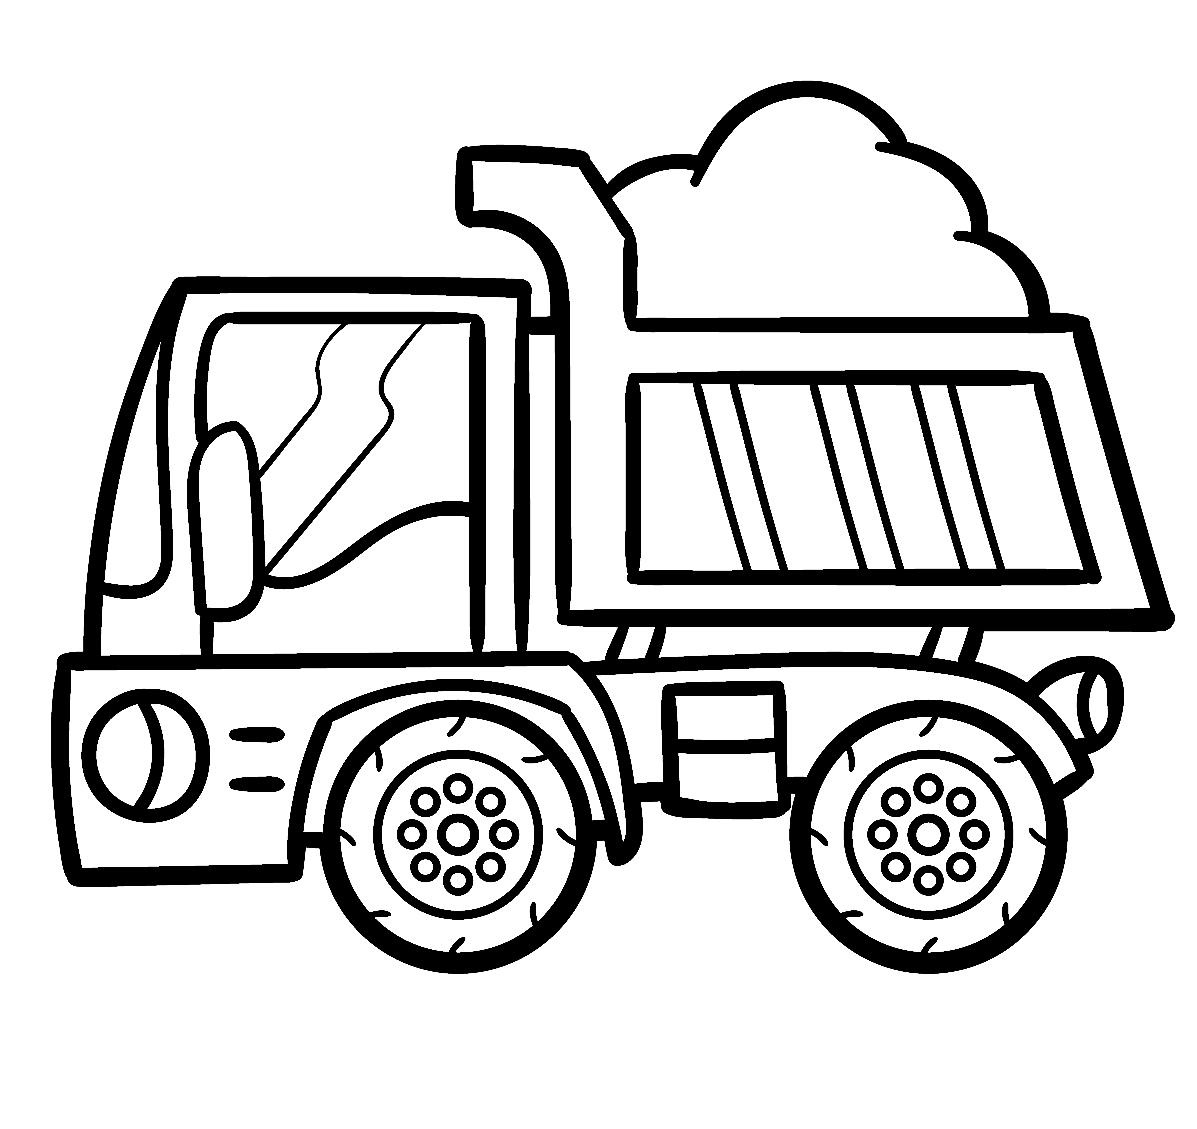 Simple Dump Truck Coloring Pages